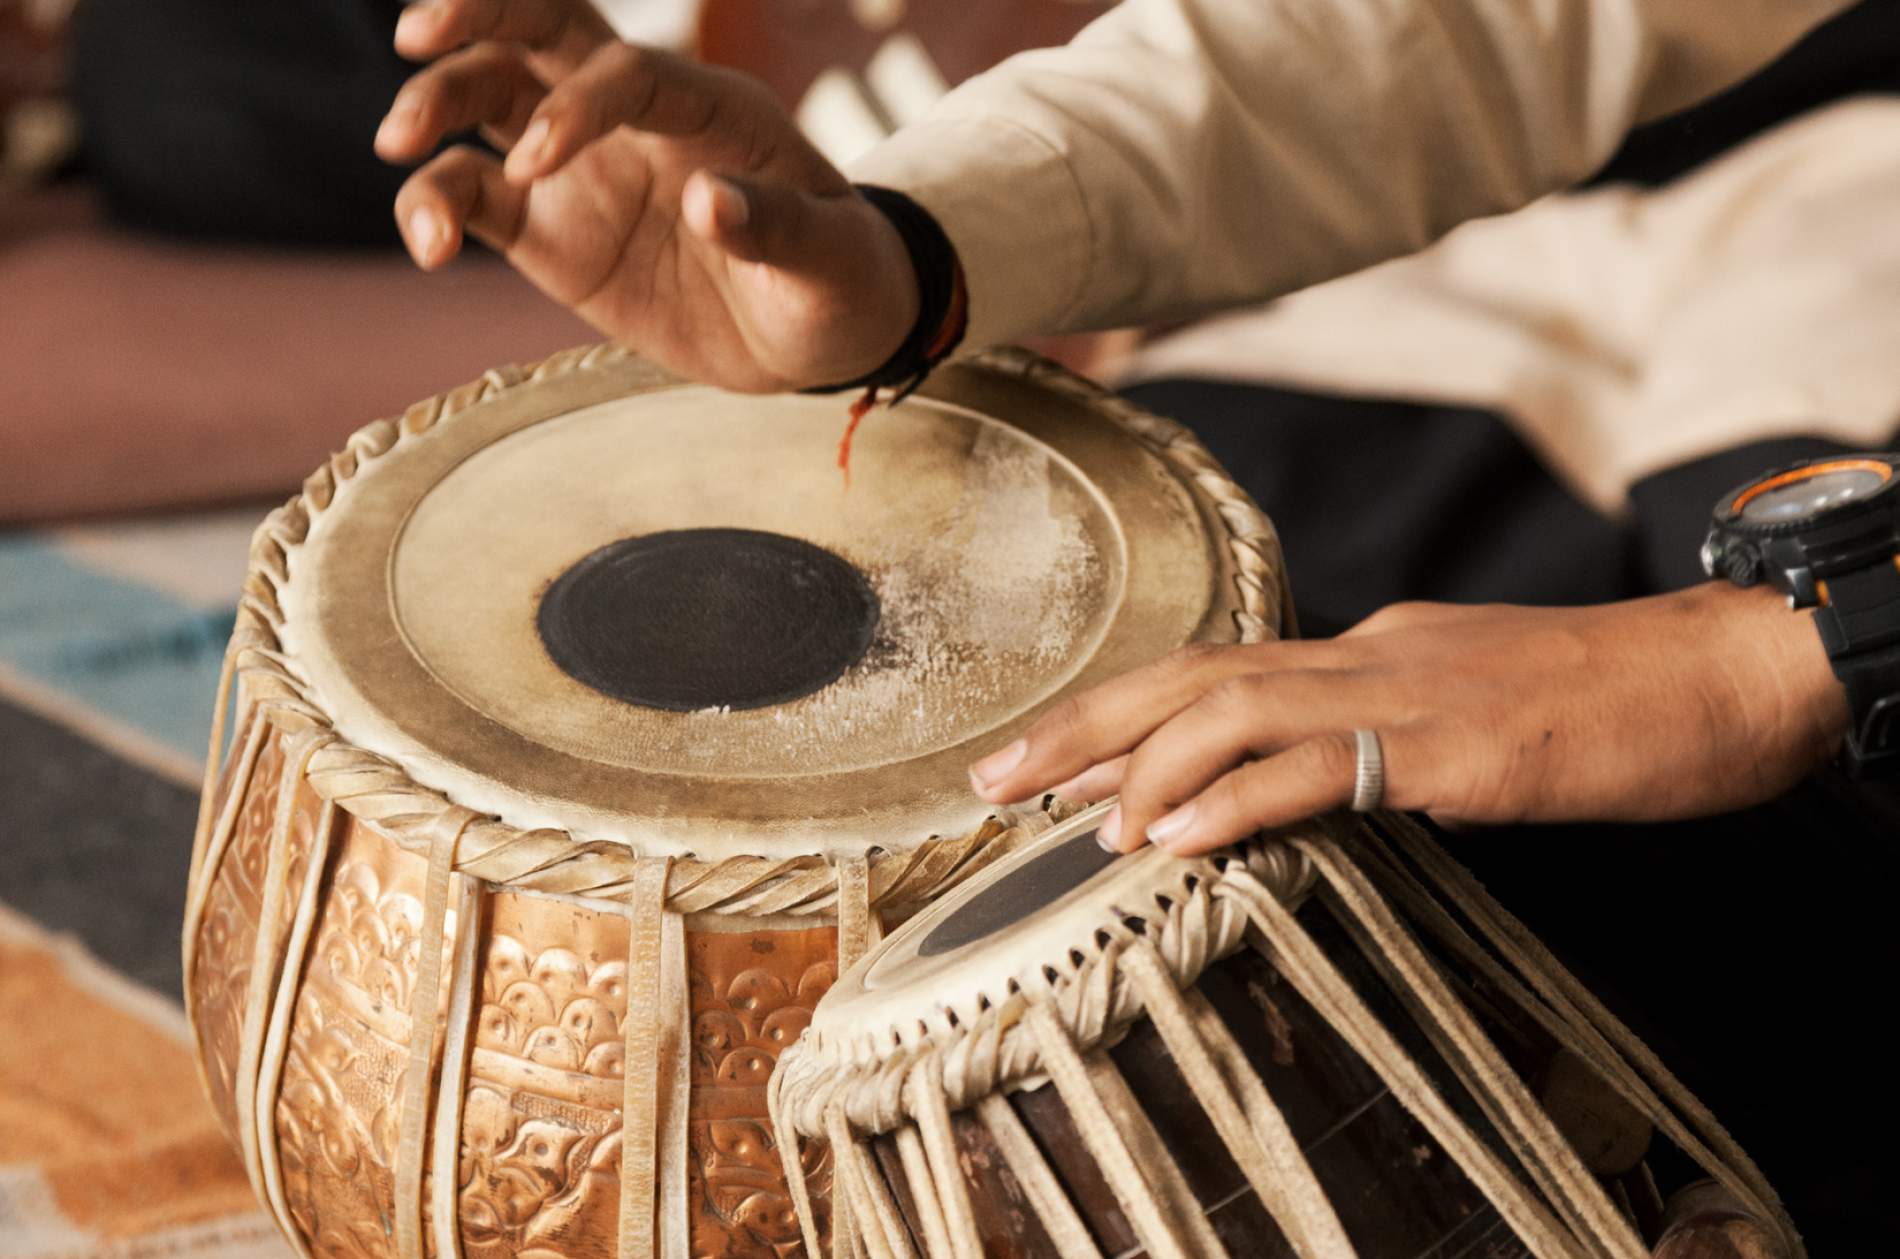 tabla percussion instrument being played with two hands visible